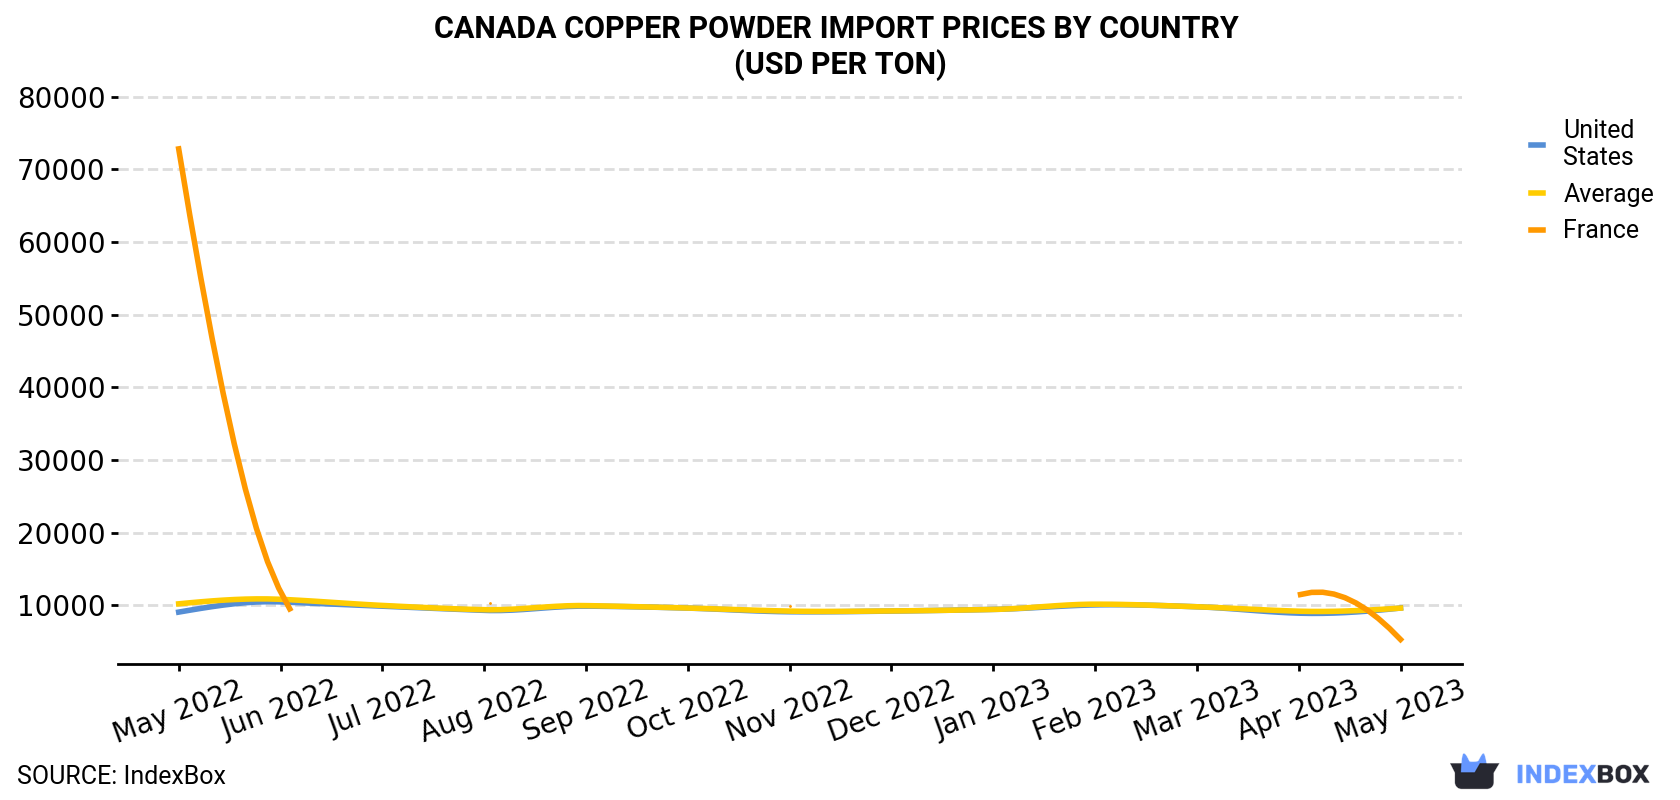 Canada Copper Powder Import Prices By Country (USD Per Ton)